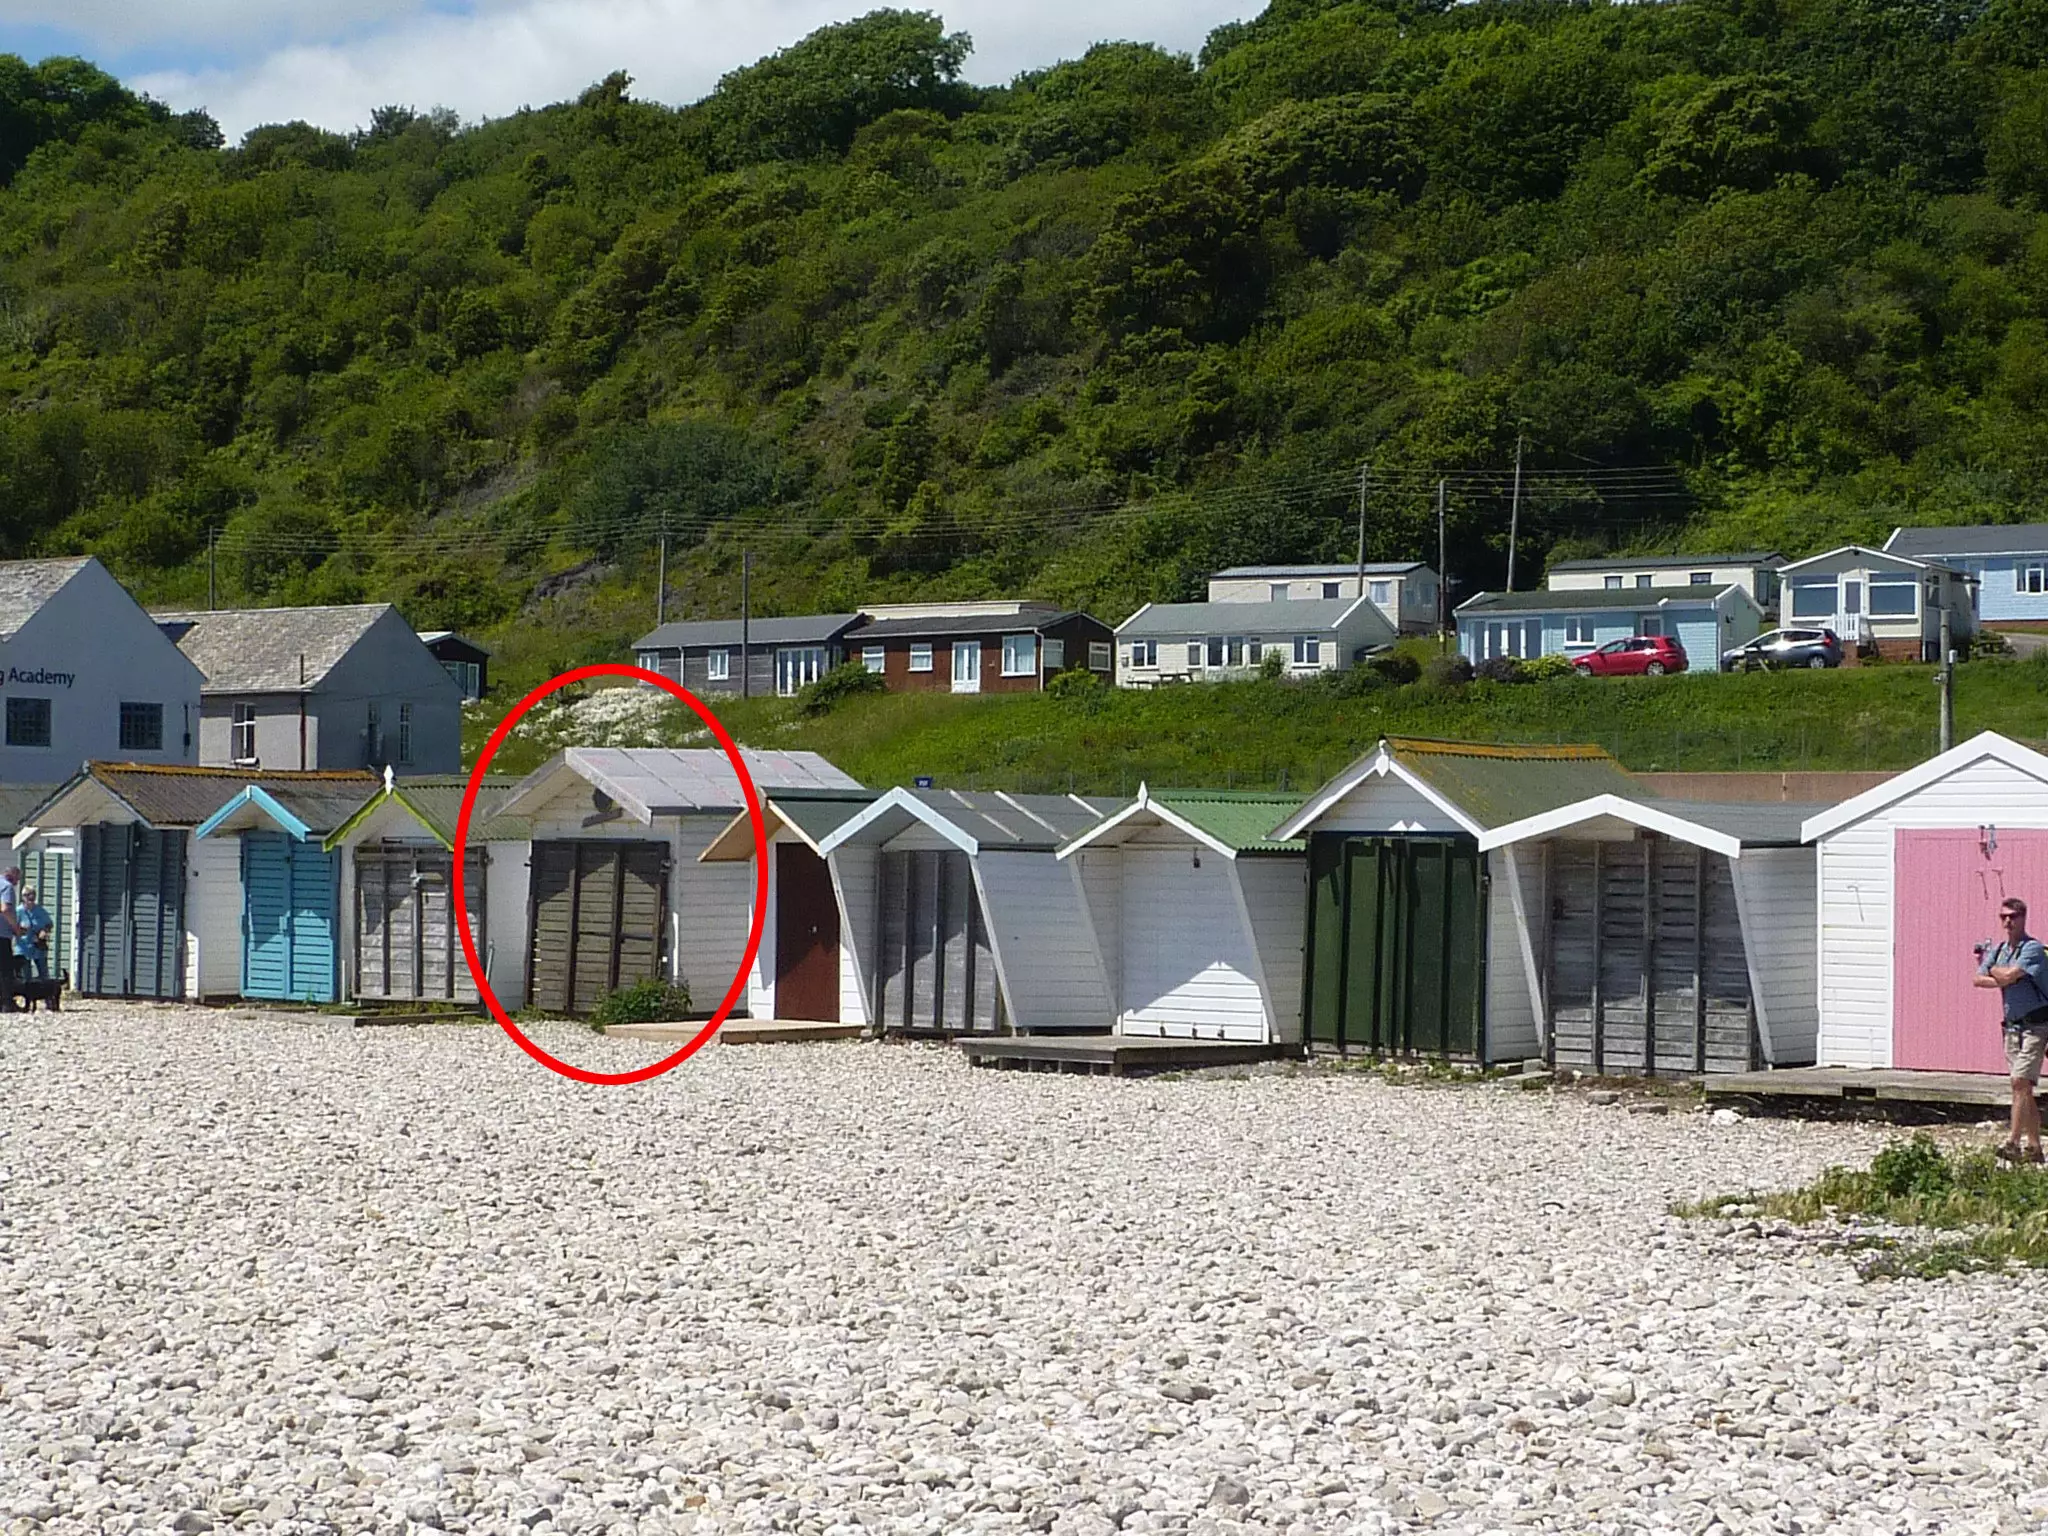 The beach hut is for sale in Dorset (